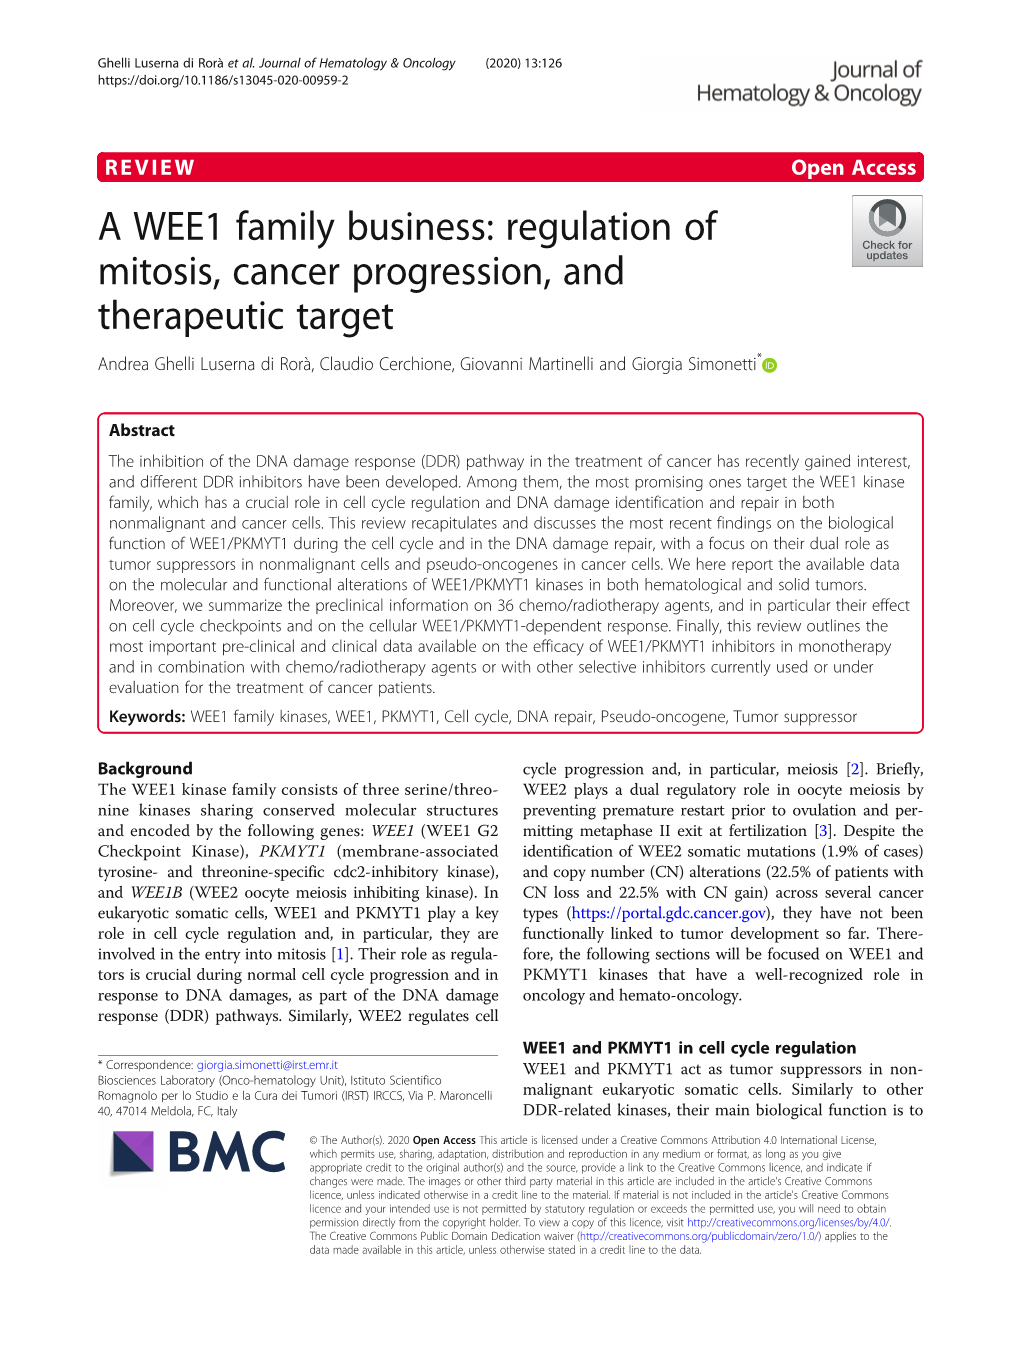 A WEE1 Family Business: Regulation of Mitosis, Cancer Progression, and Therapeutic Target